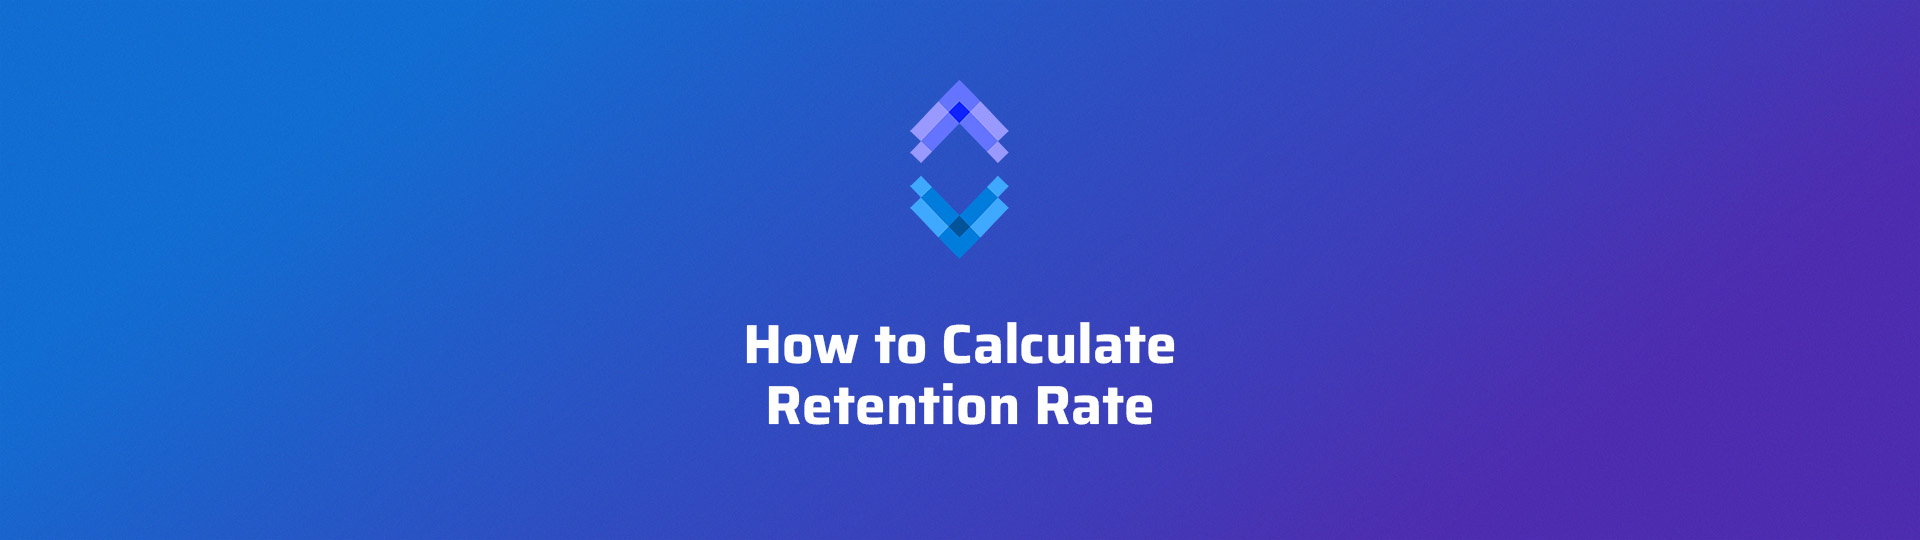 How to Calculate Retention Rate &#038; Increase MRR in SaaS